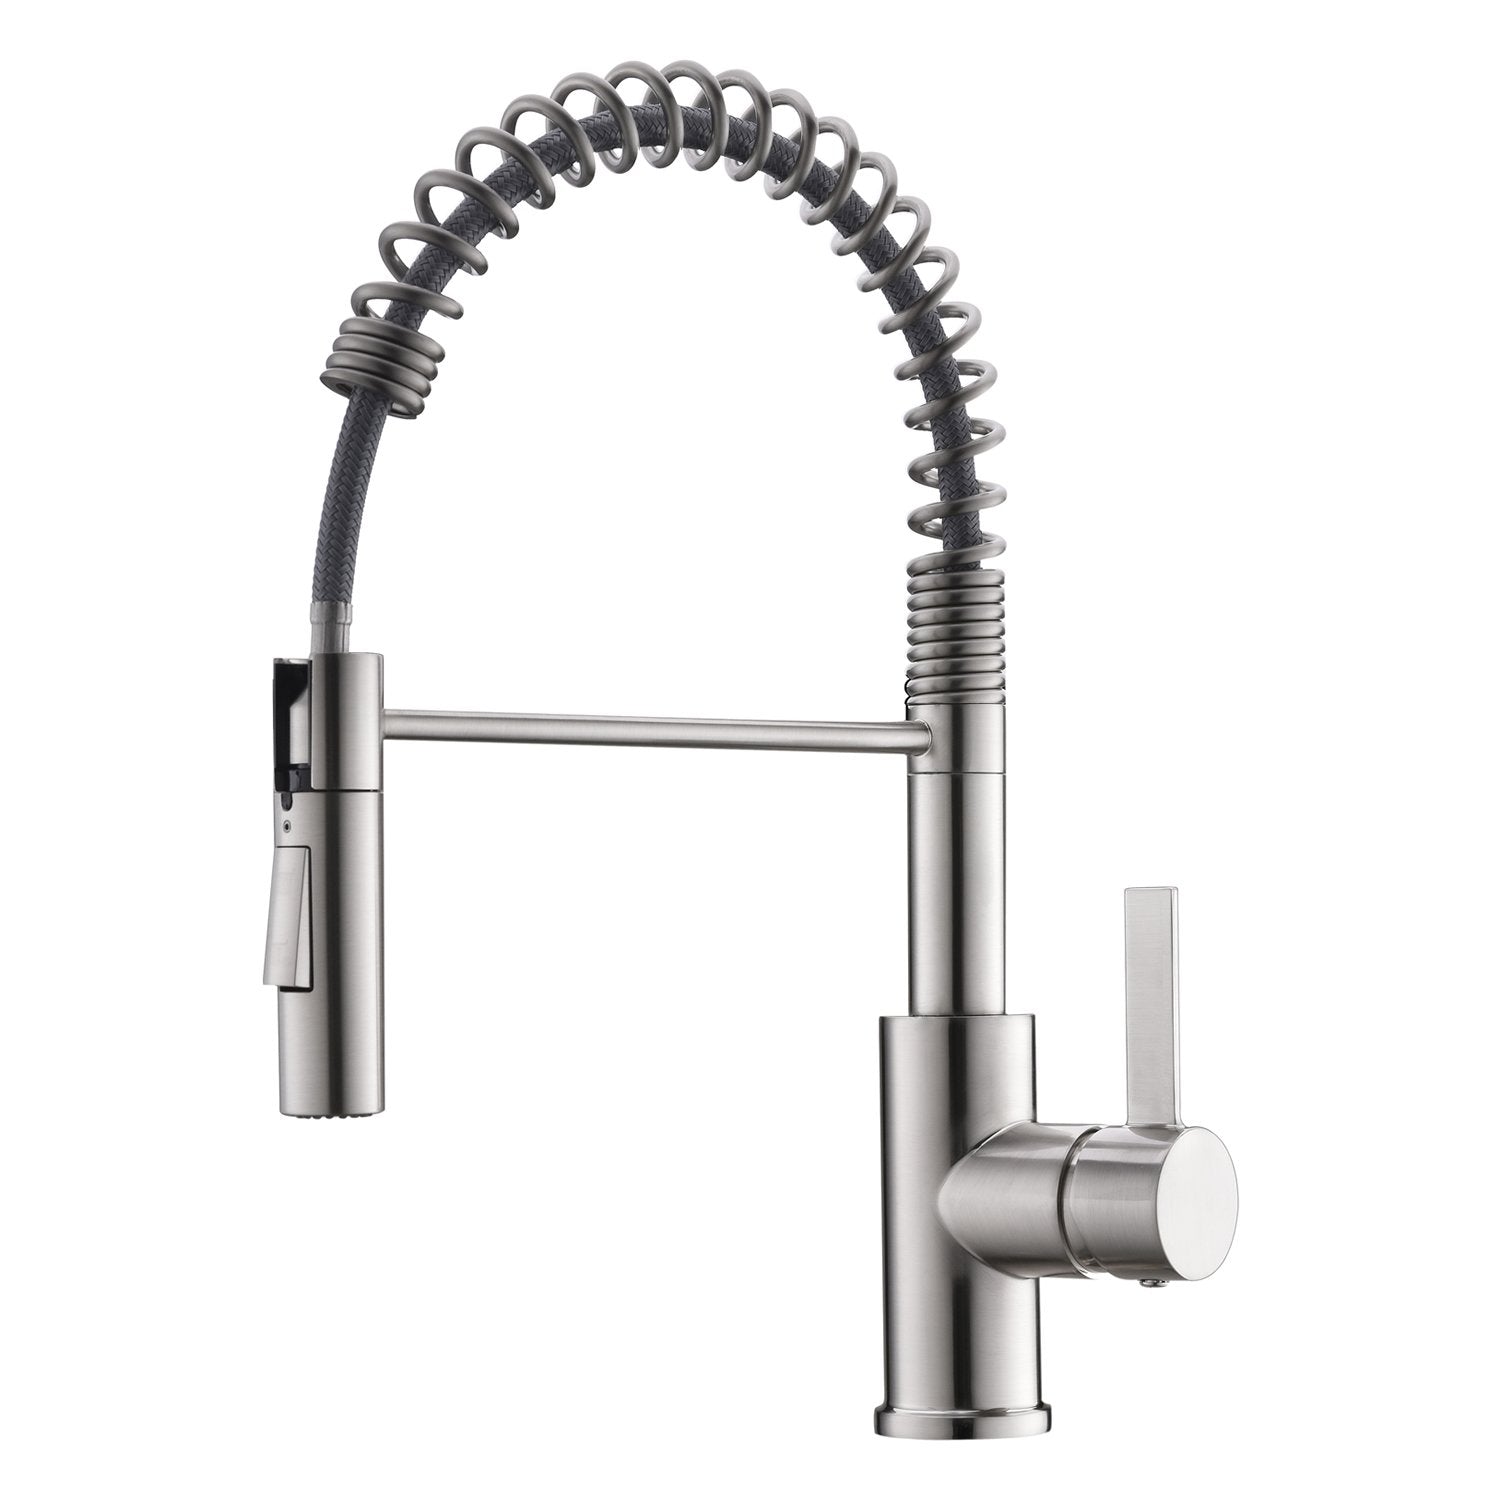 DAX Single Handle Pull Out Kitchen Faucet with Dual Sprayer and Swivel Spout, Brass Body, Brushed Nickel Finish, 8-11/16 x 16 Inches (DAX-6965C-BN)